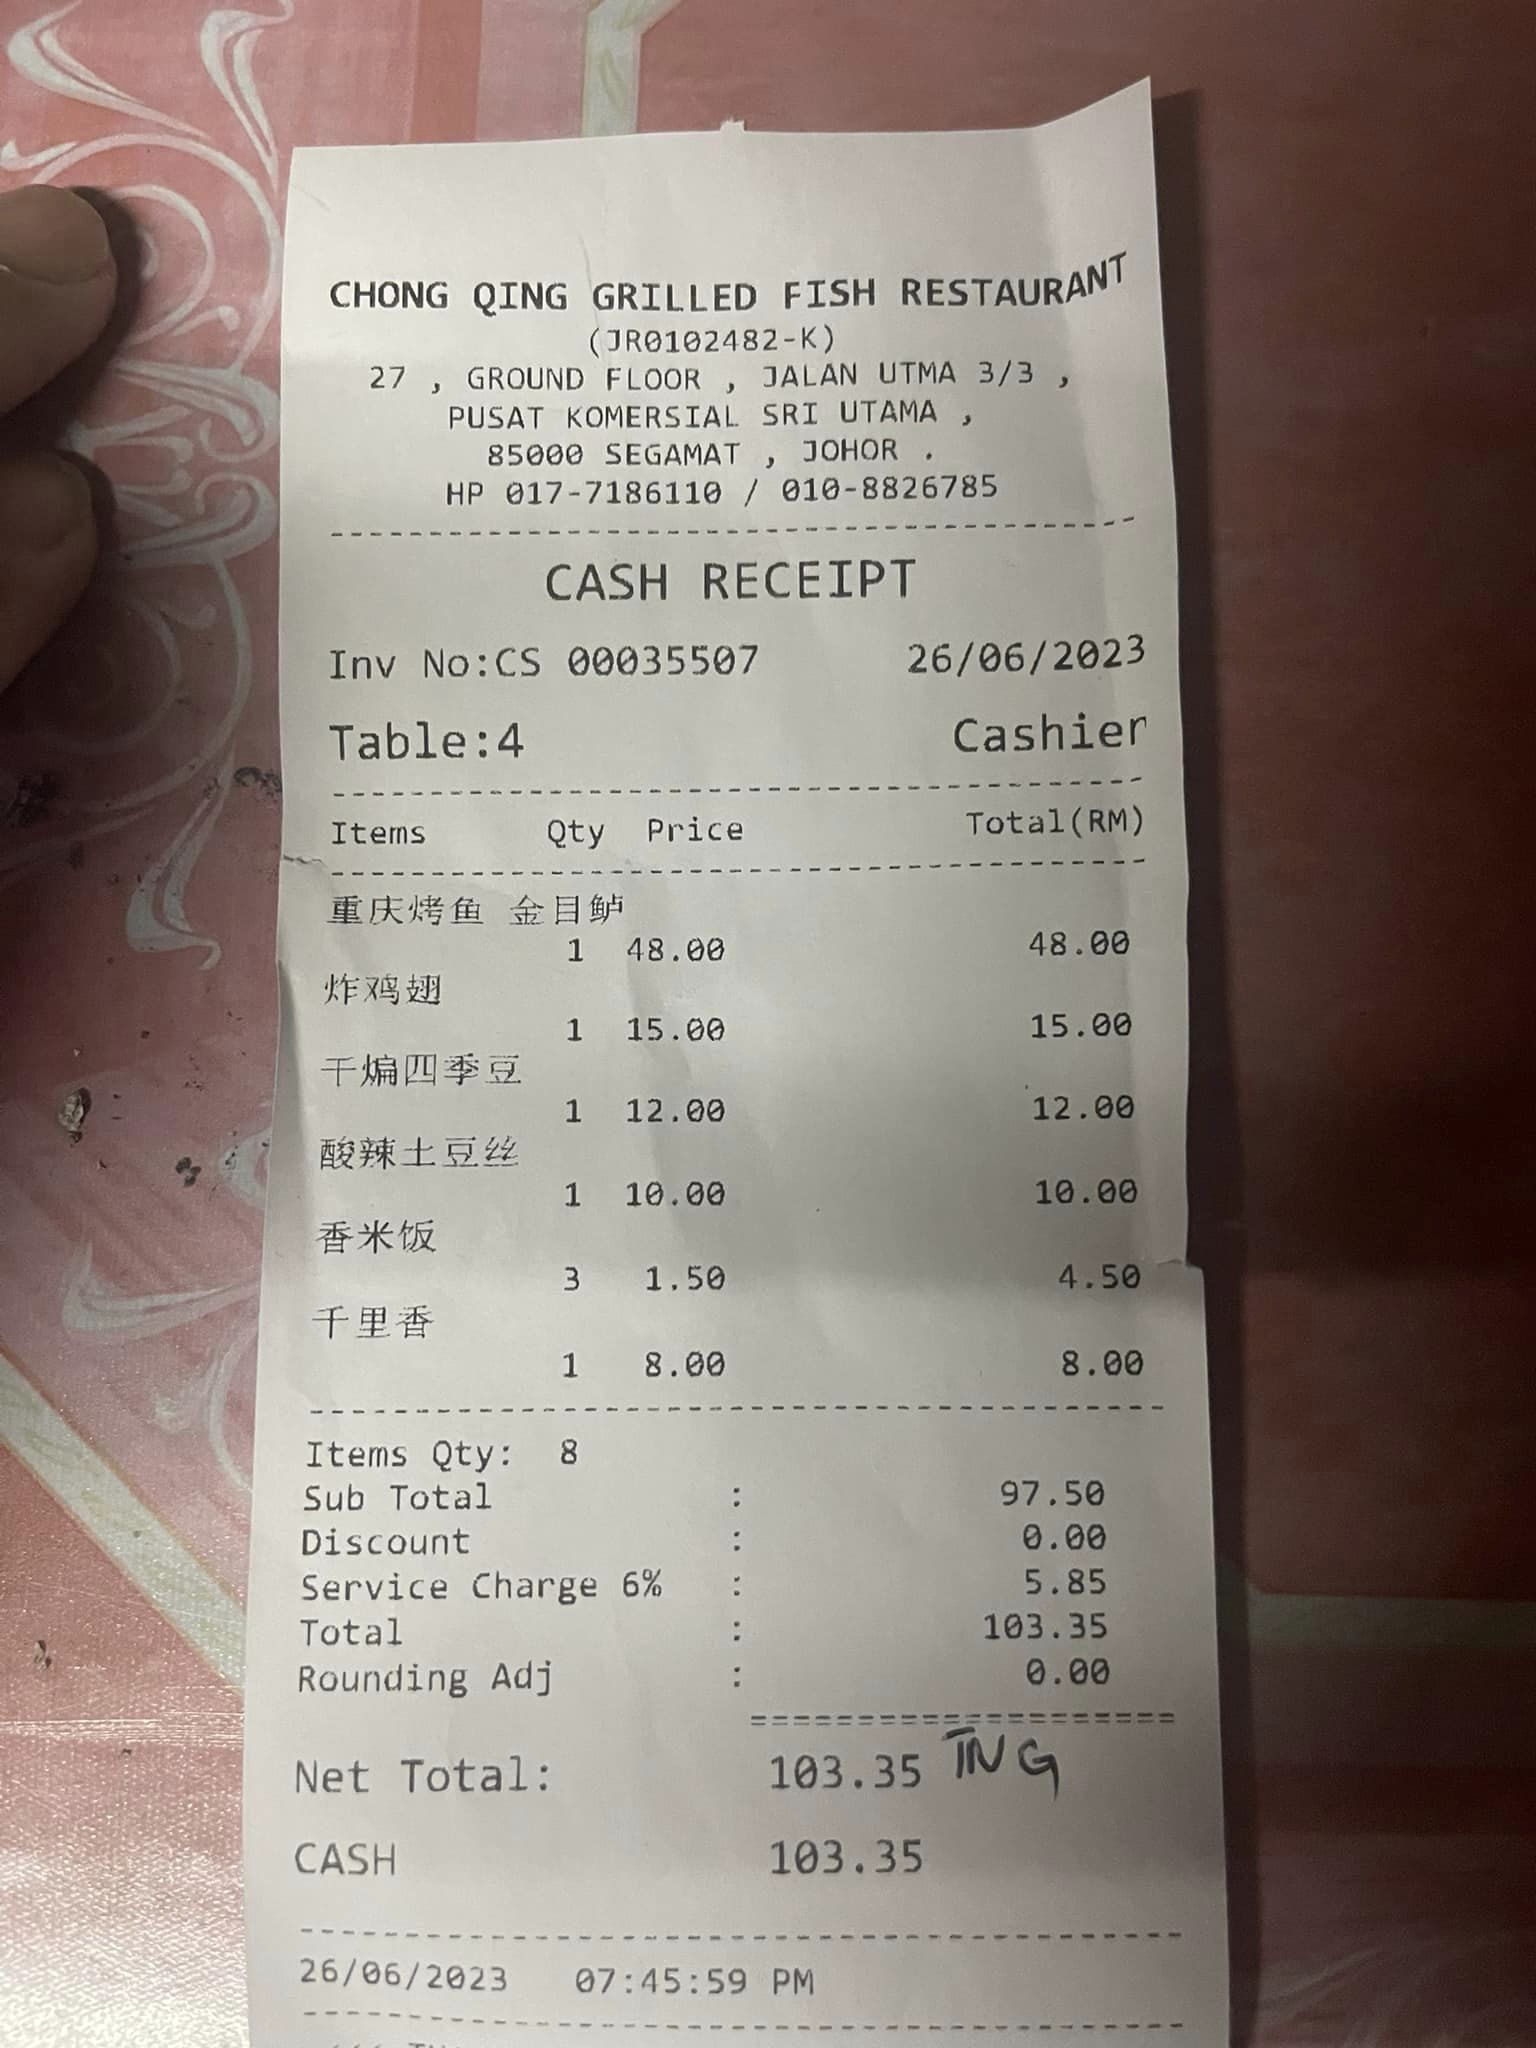 Original receipt the customer should pay to the grilled fish restaurant